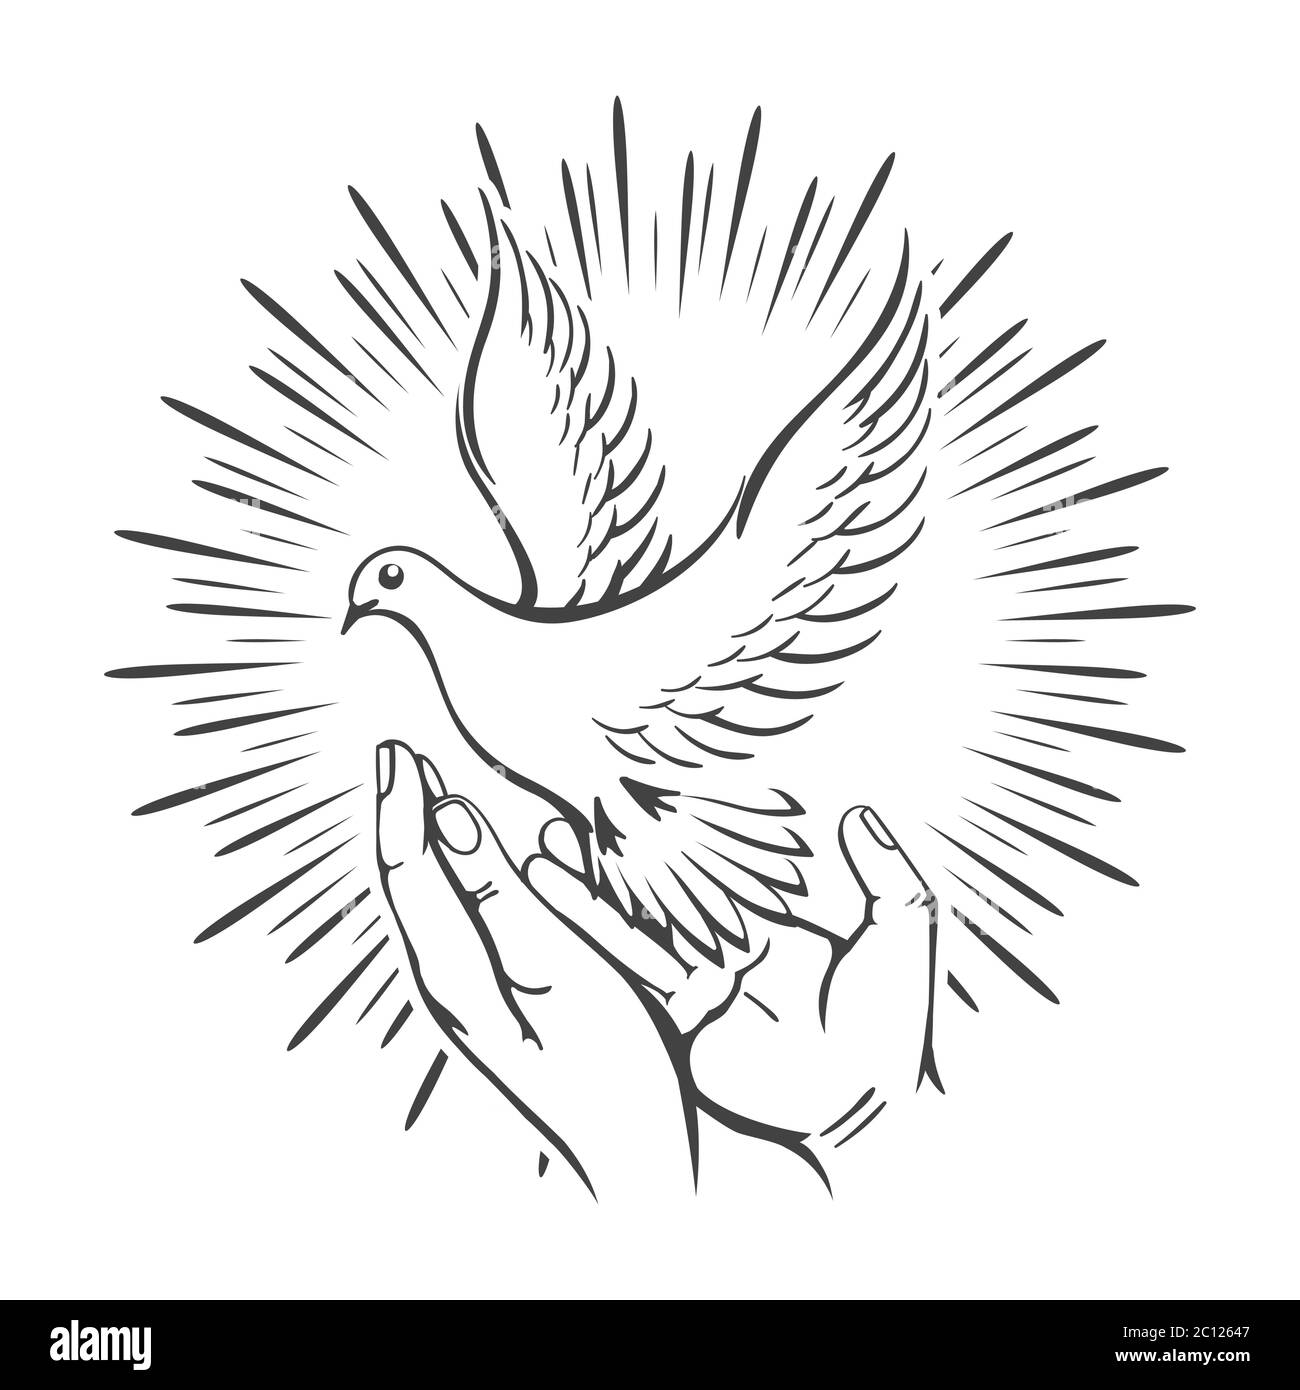 Human Hands Released Dove into the Sky drawn inTattoo style. Vector illustration. Stock Vector